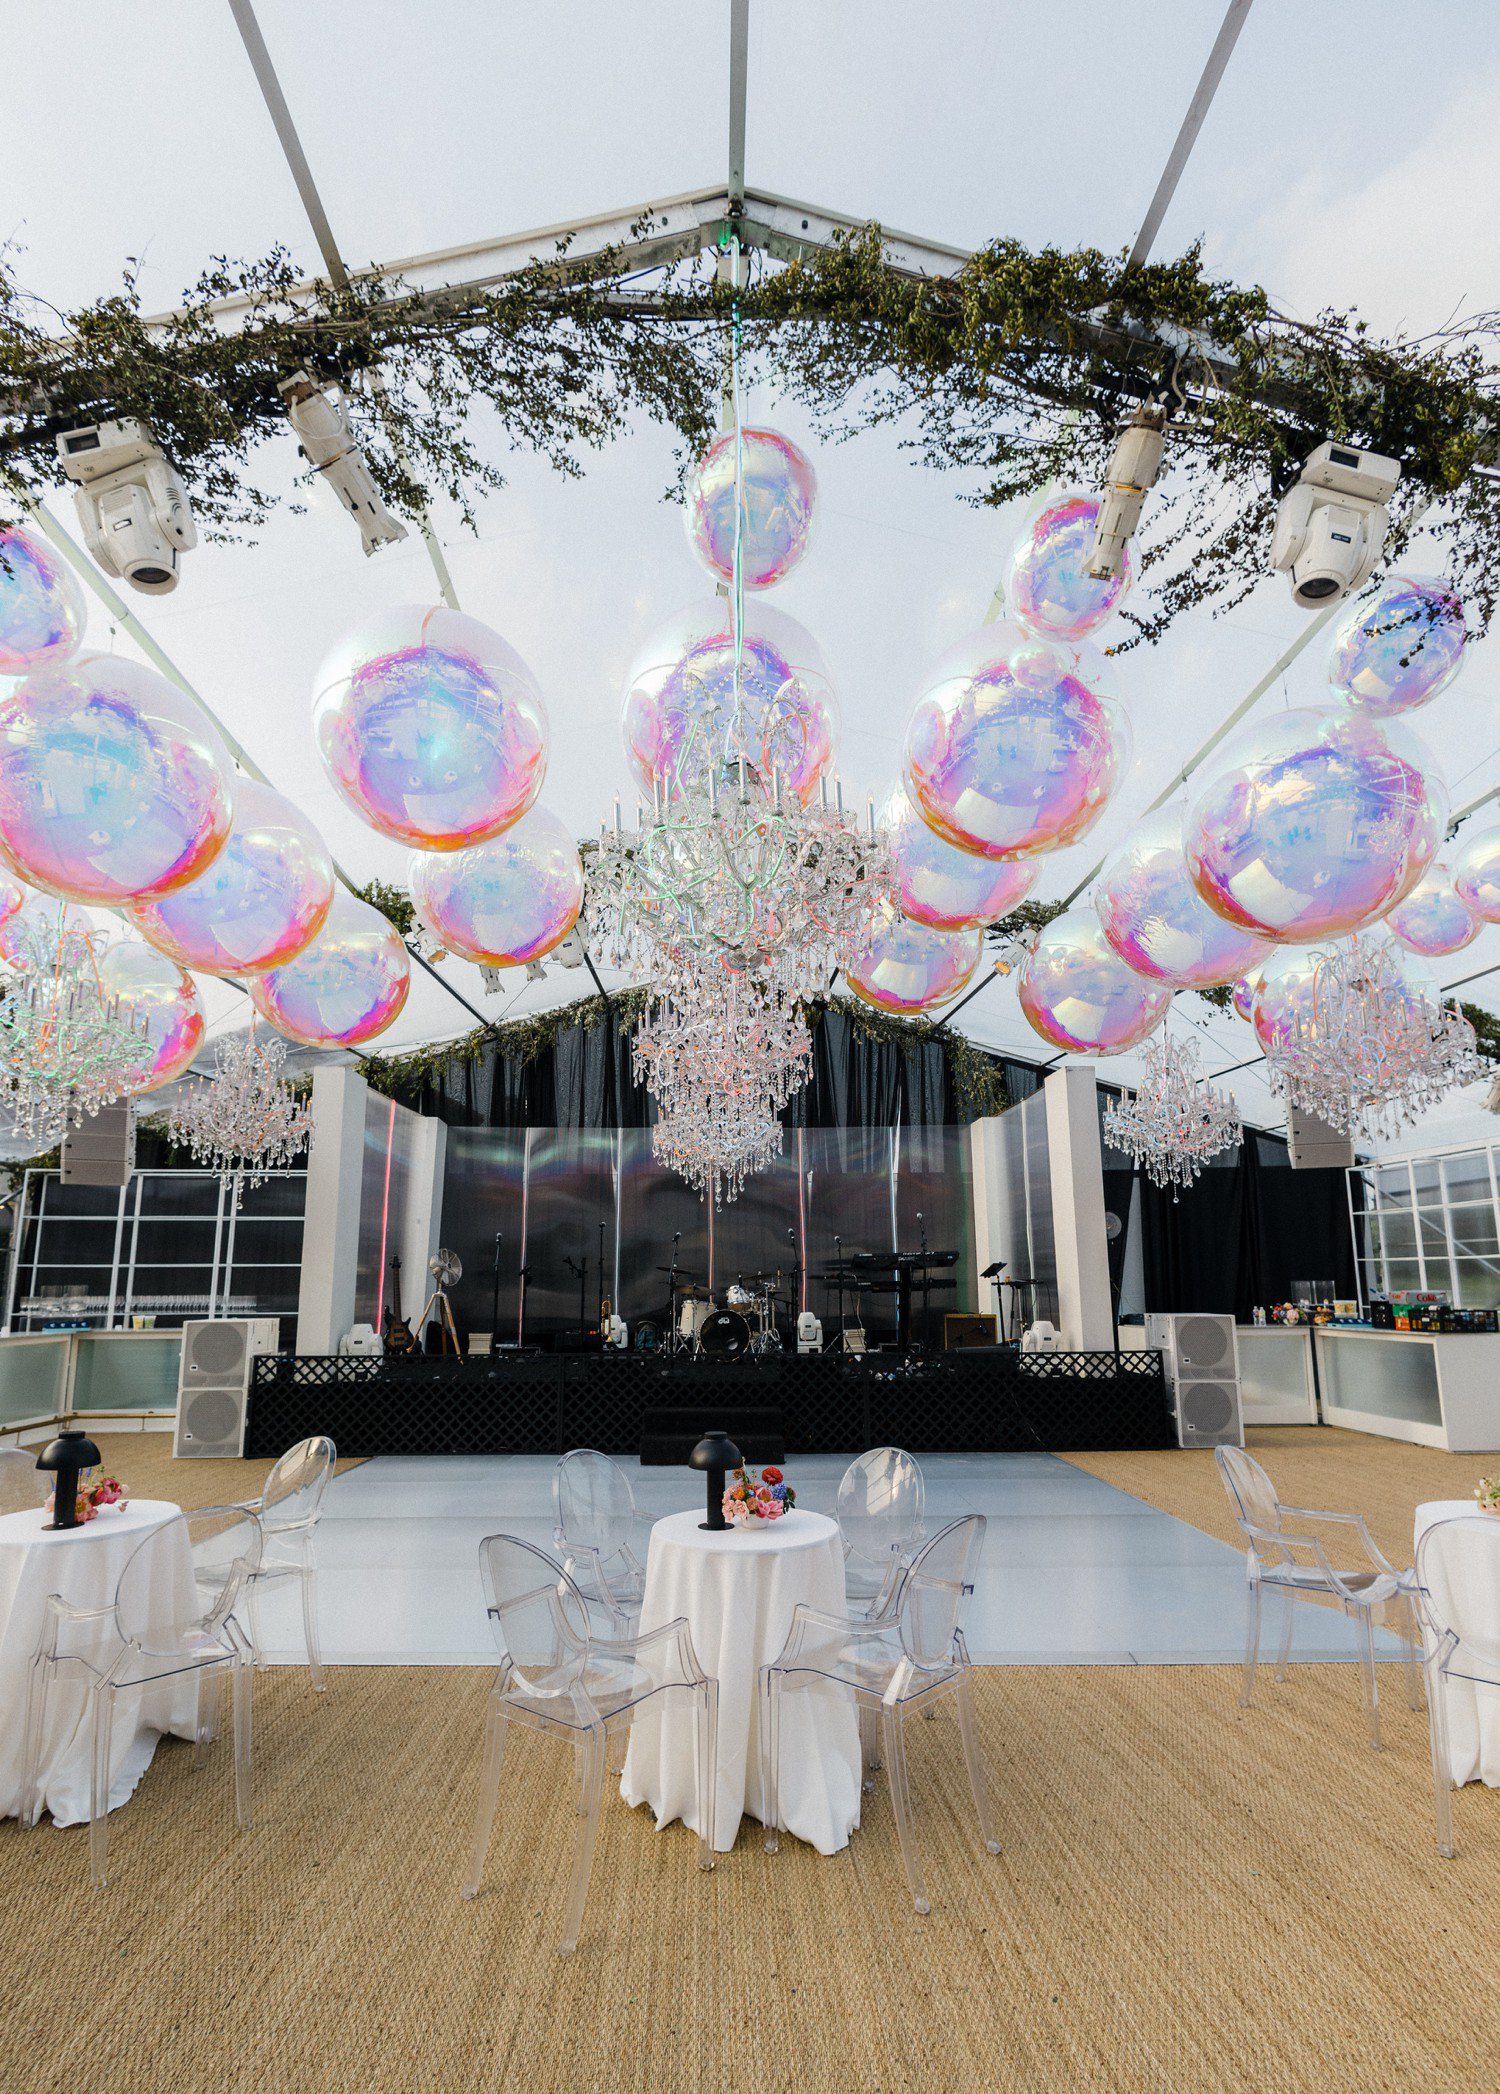 Wedding reception dance floor with chandeliers and balloons.